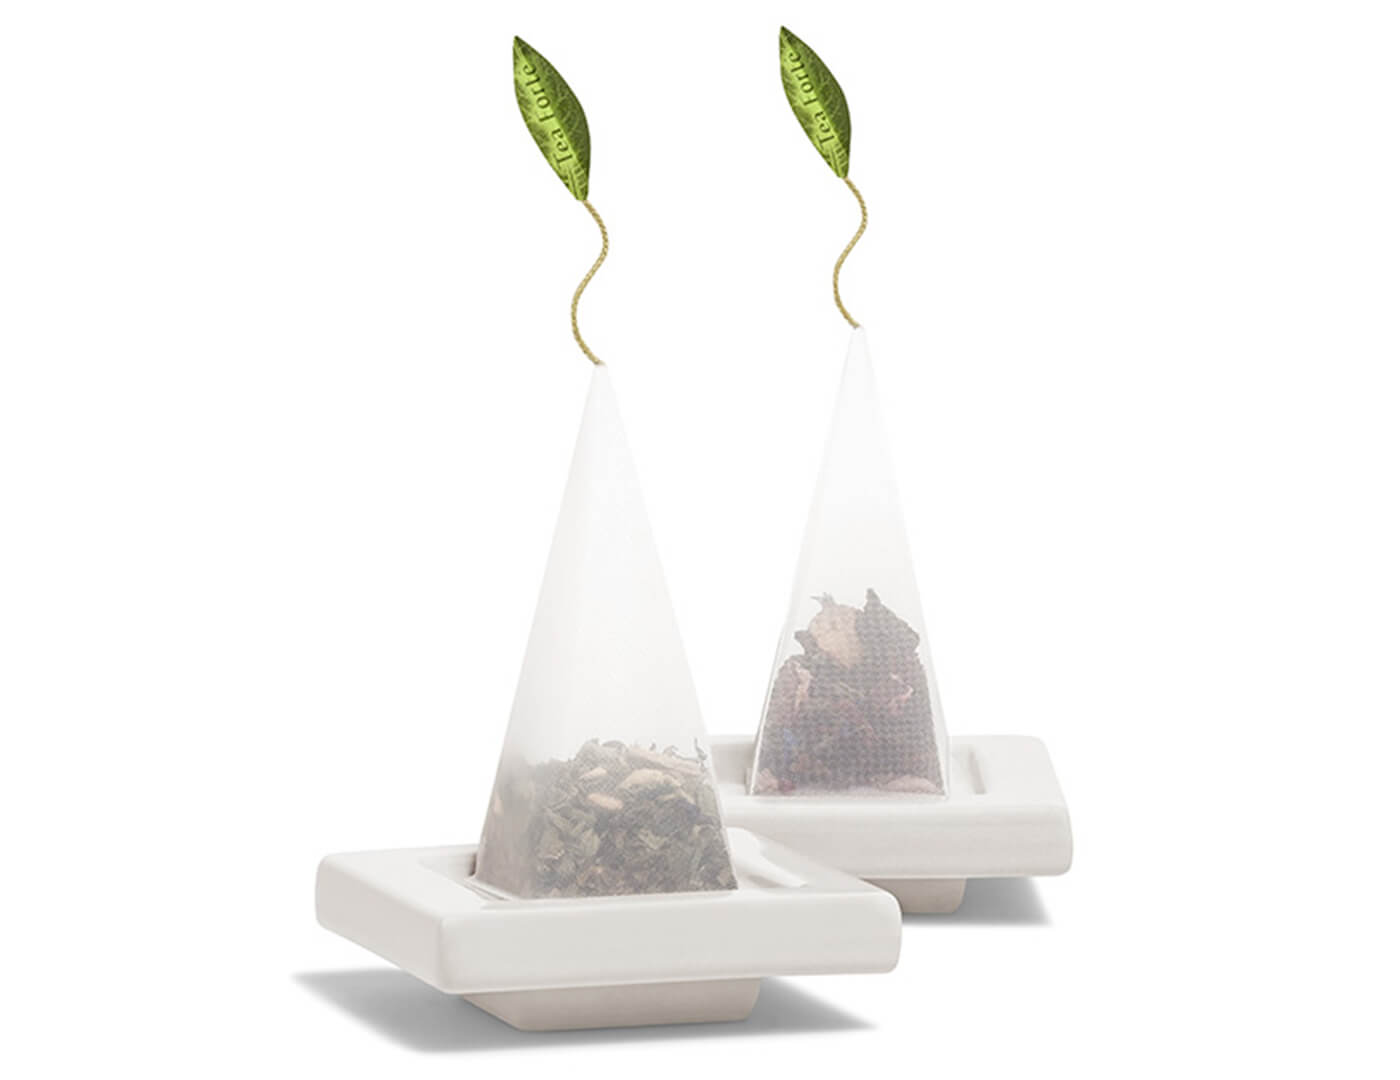 Two Orchid White Tea Trays with pyramid tea infusers resting on top.